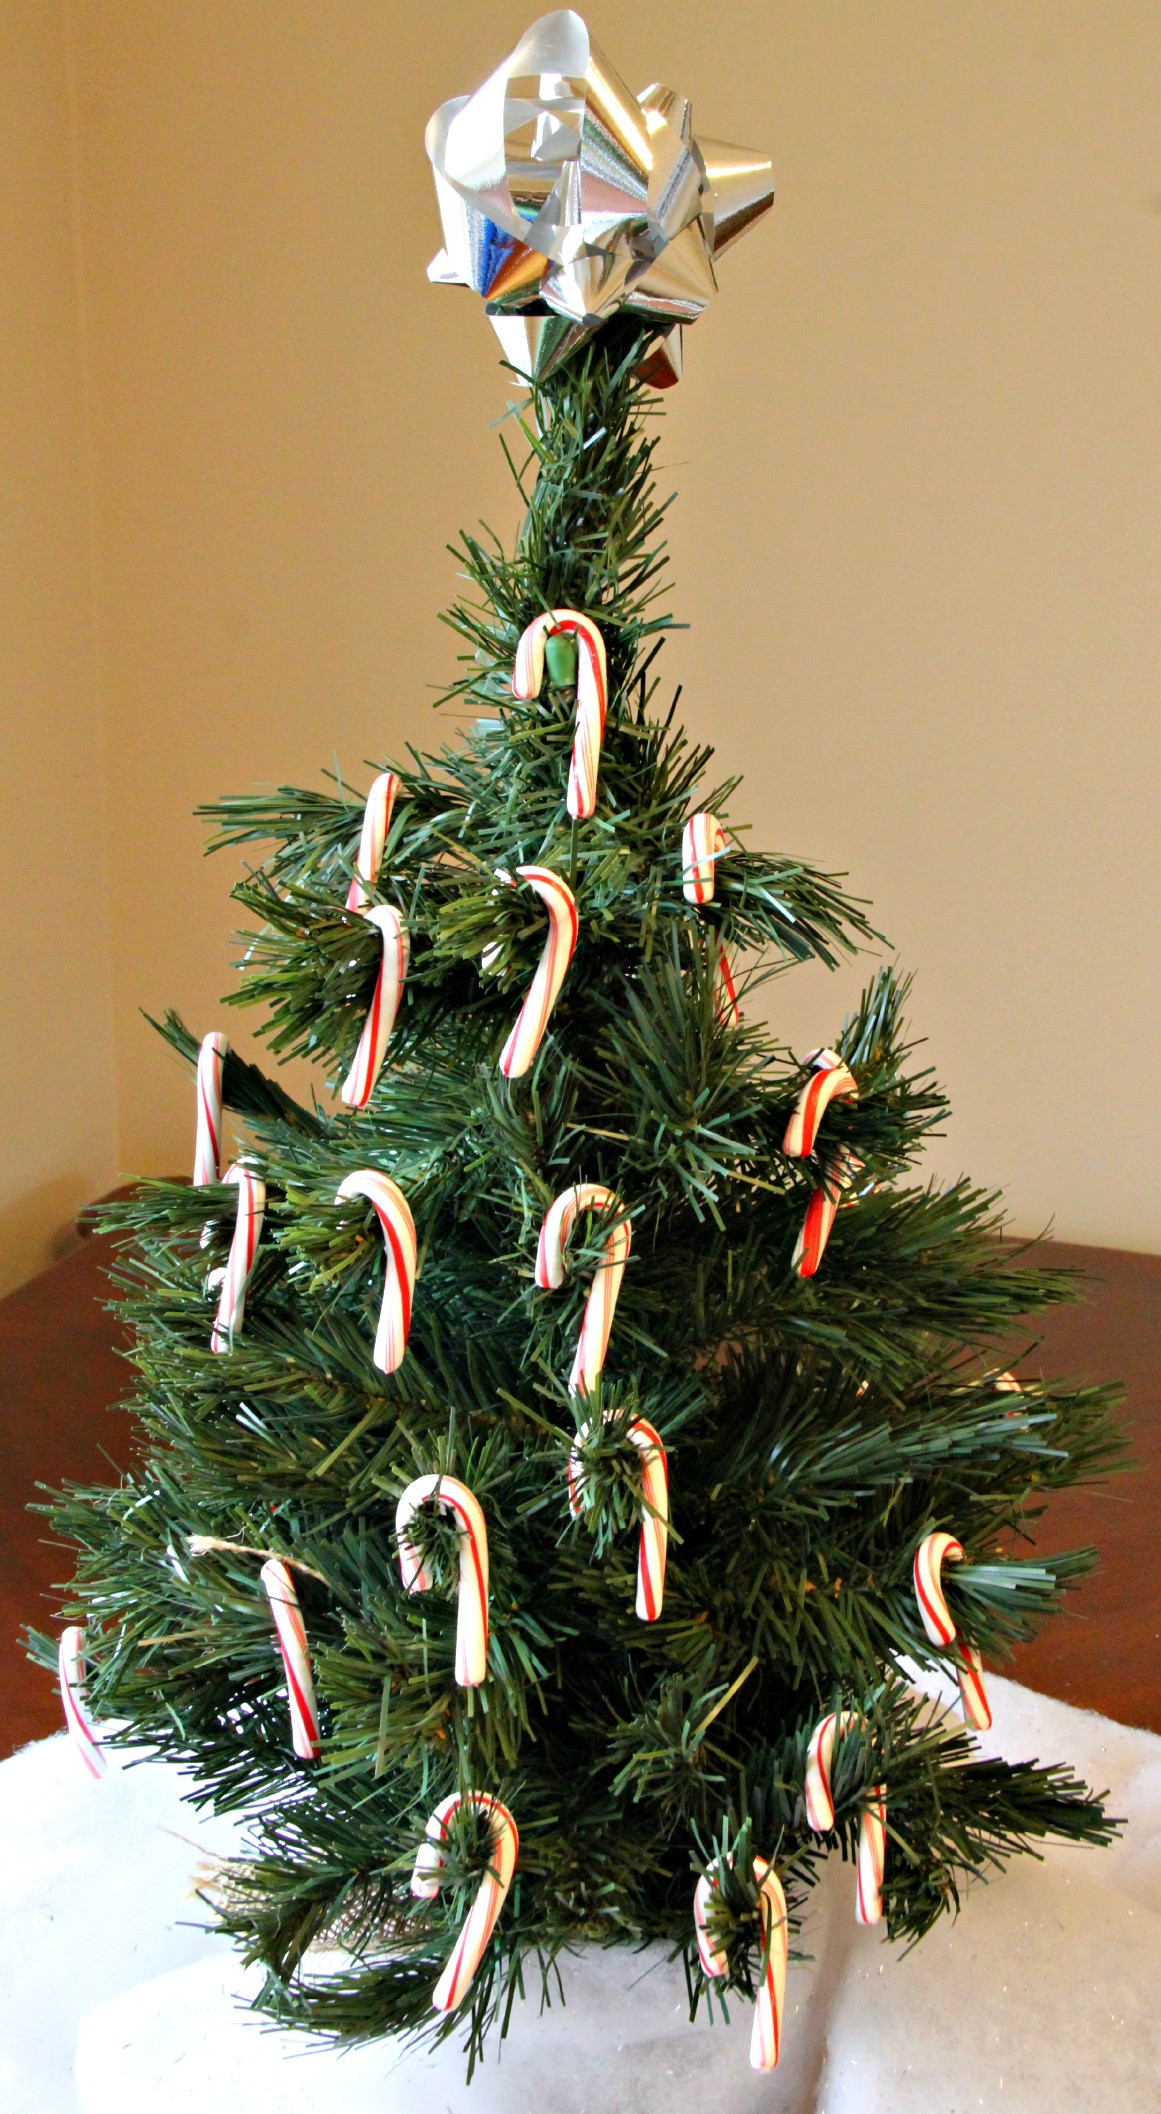 Candy Cane Christmas Tree
 46 Famous Candy Christmas Tree Decorations Ideas